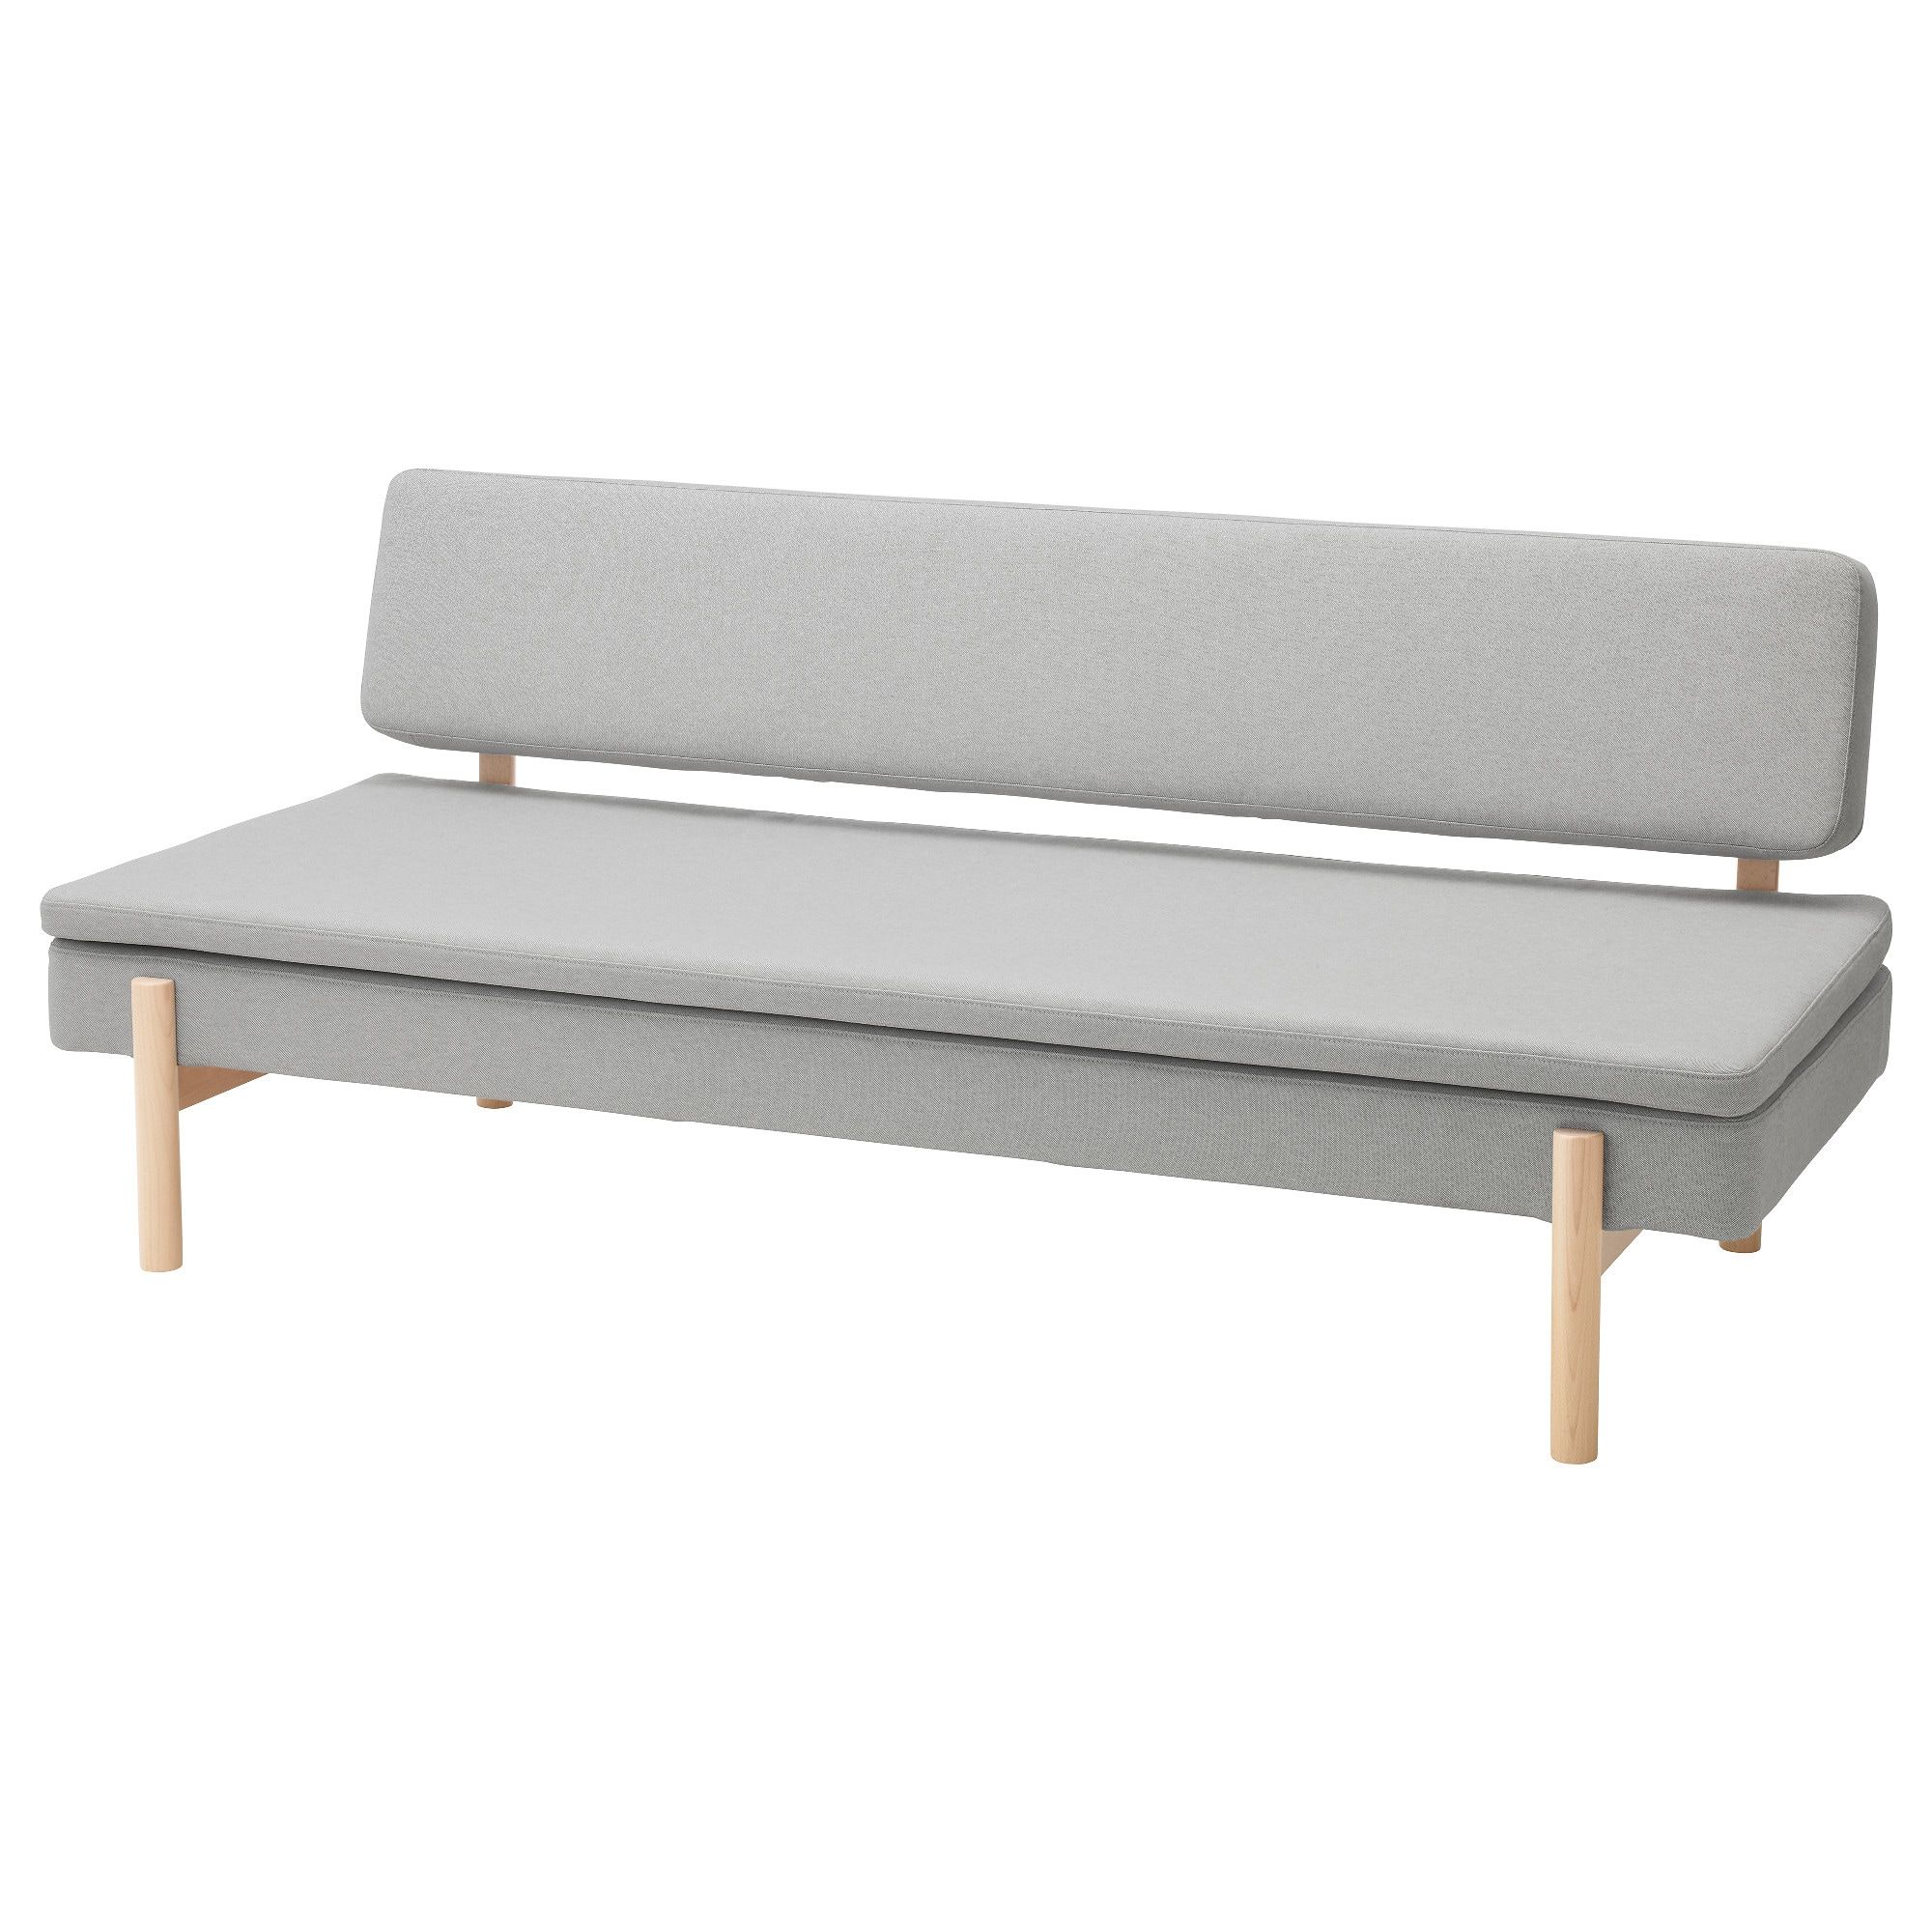 Sofas – Settees, Couches & More | Ikea For Ikea Sofa Chairs (View 25 of 25)